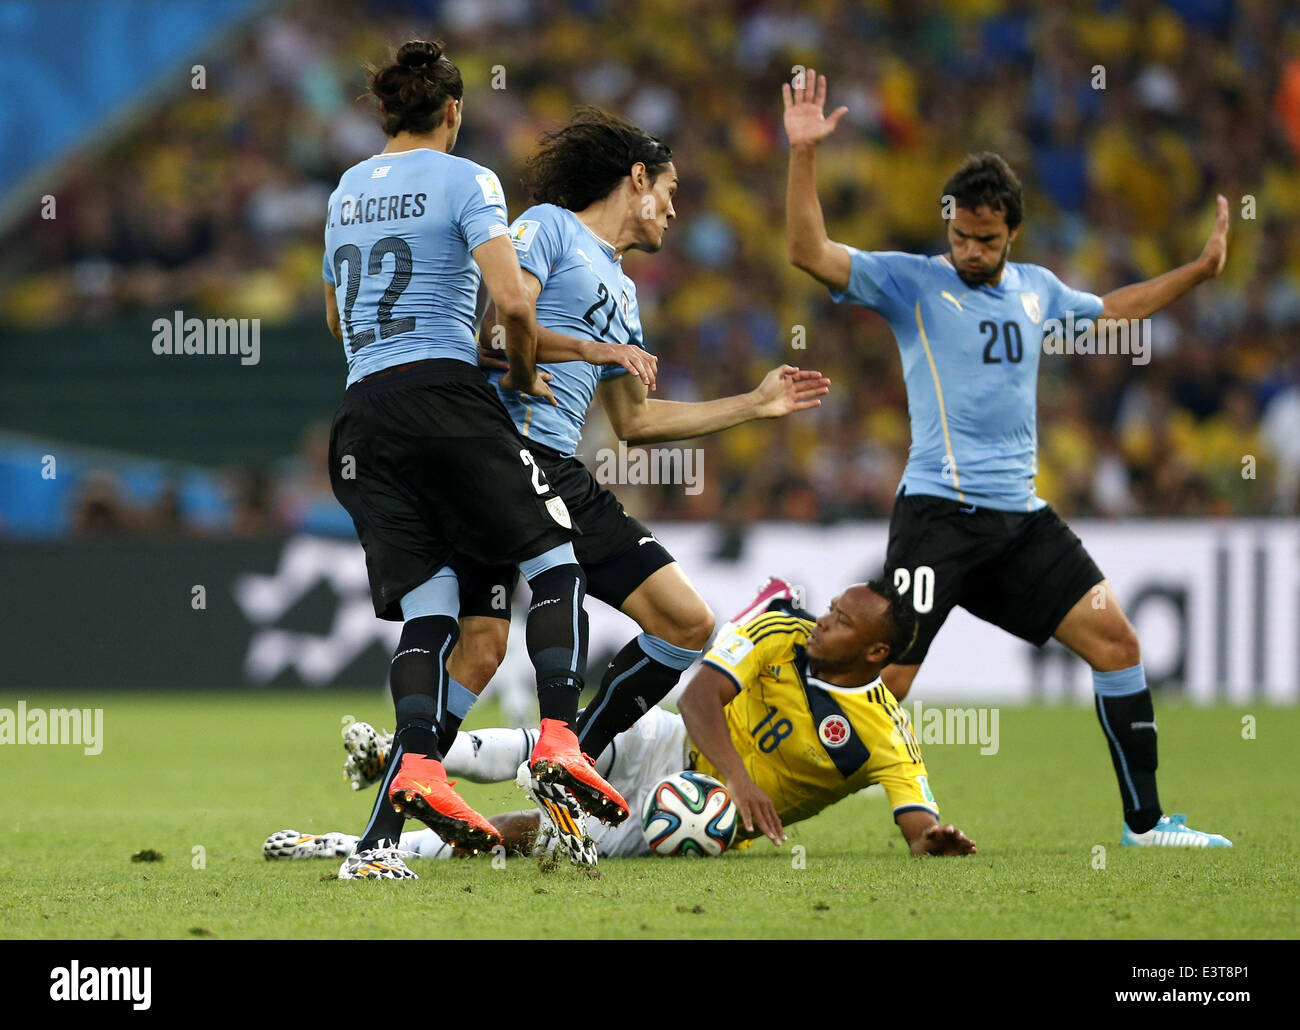 Rio De Janeiro, Brazil. 28th June, 2014. Colombia's Juan Zuniga (3rd L) vies with Uruguay's Martin Caceres (1st L), Edinson Cavani (2nd L) and Alvaro Gonzalez (1st R) during a Round of 16 match between Colombia and Uruguay of 2014 FIFA World Cup at the Estadio do Maracana Stadium in Rio de Janeiro, Brazil, on June 28, 2014. Credit:  Wang Lili/Xinhua/Alamy Live News Stock Photo